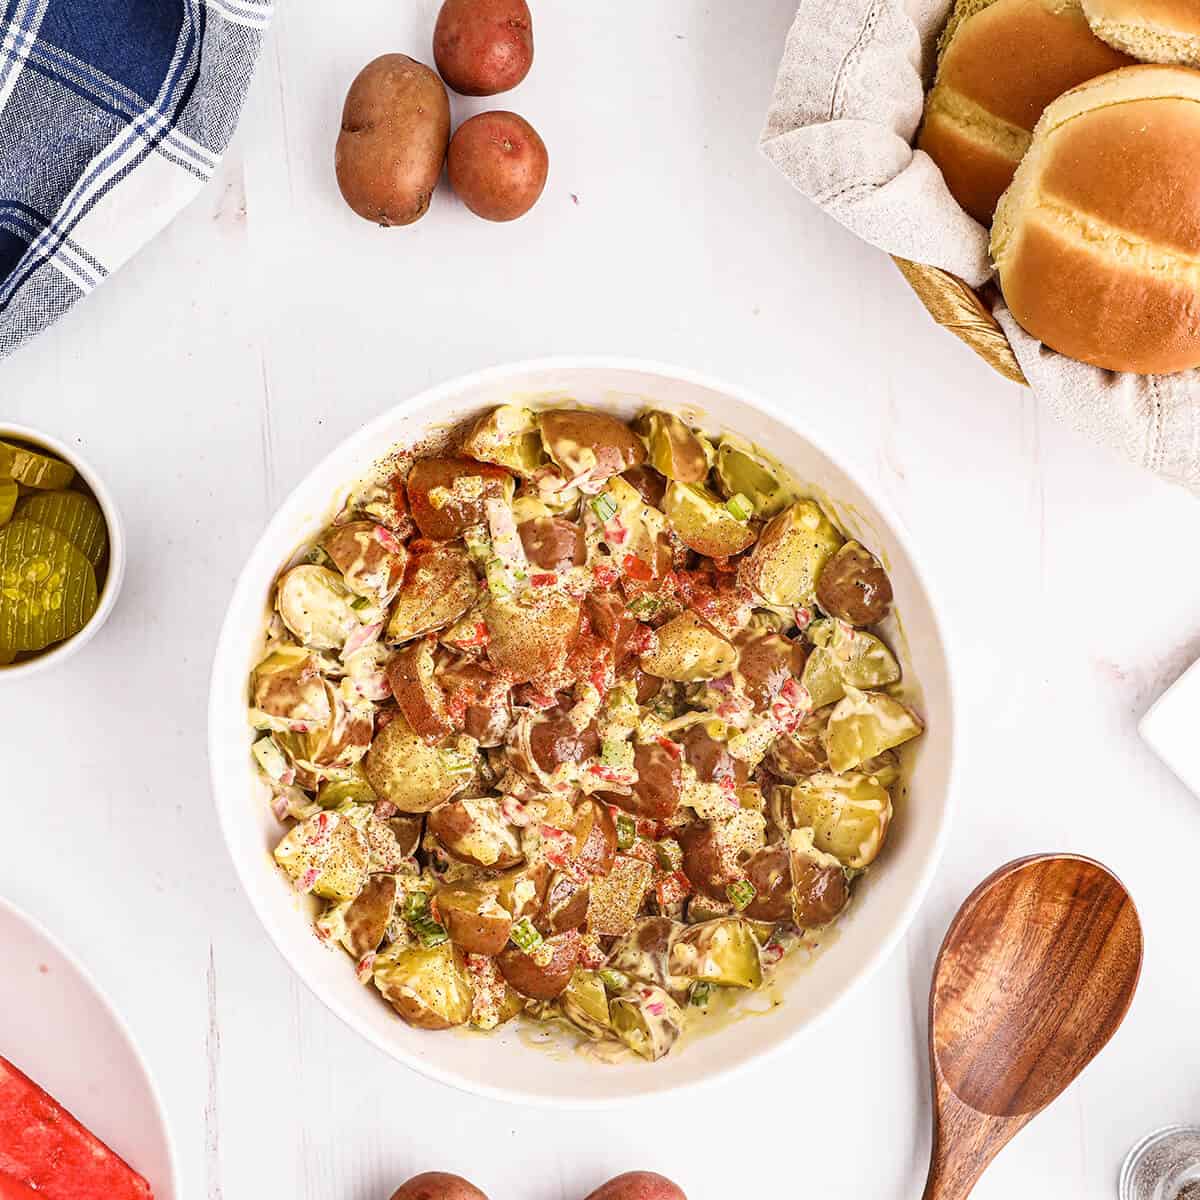 Finished potato salad in a bowl.